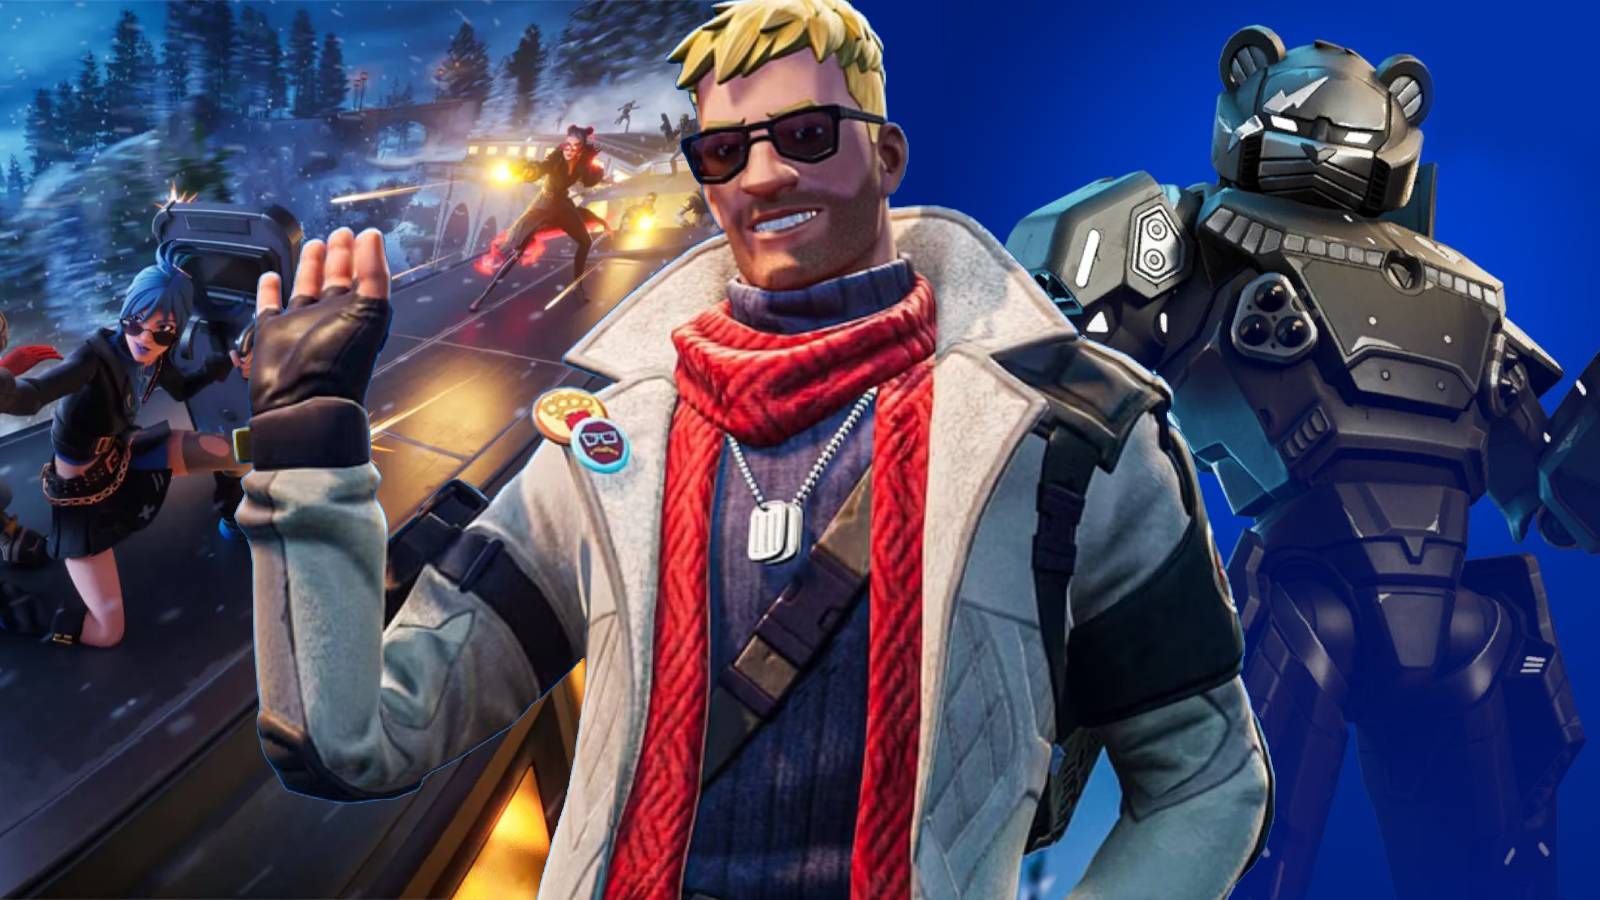 Fortnite Crew returns in April with an original character named